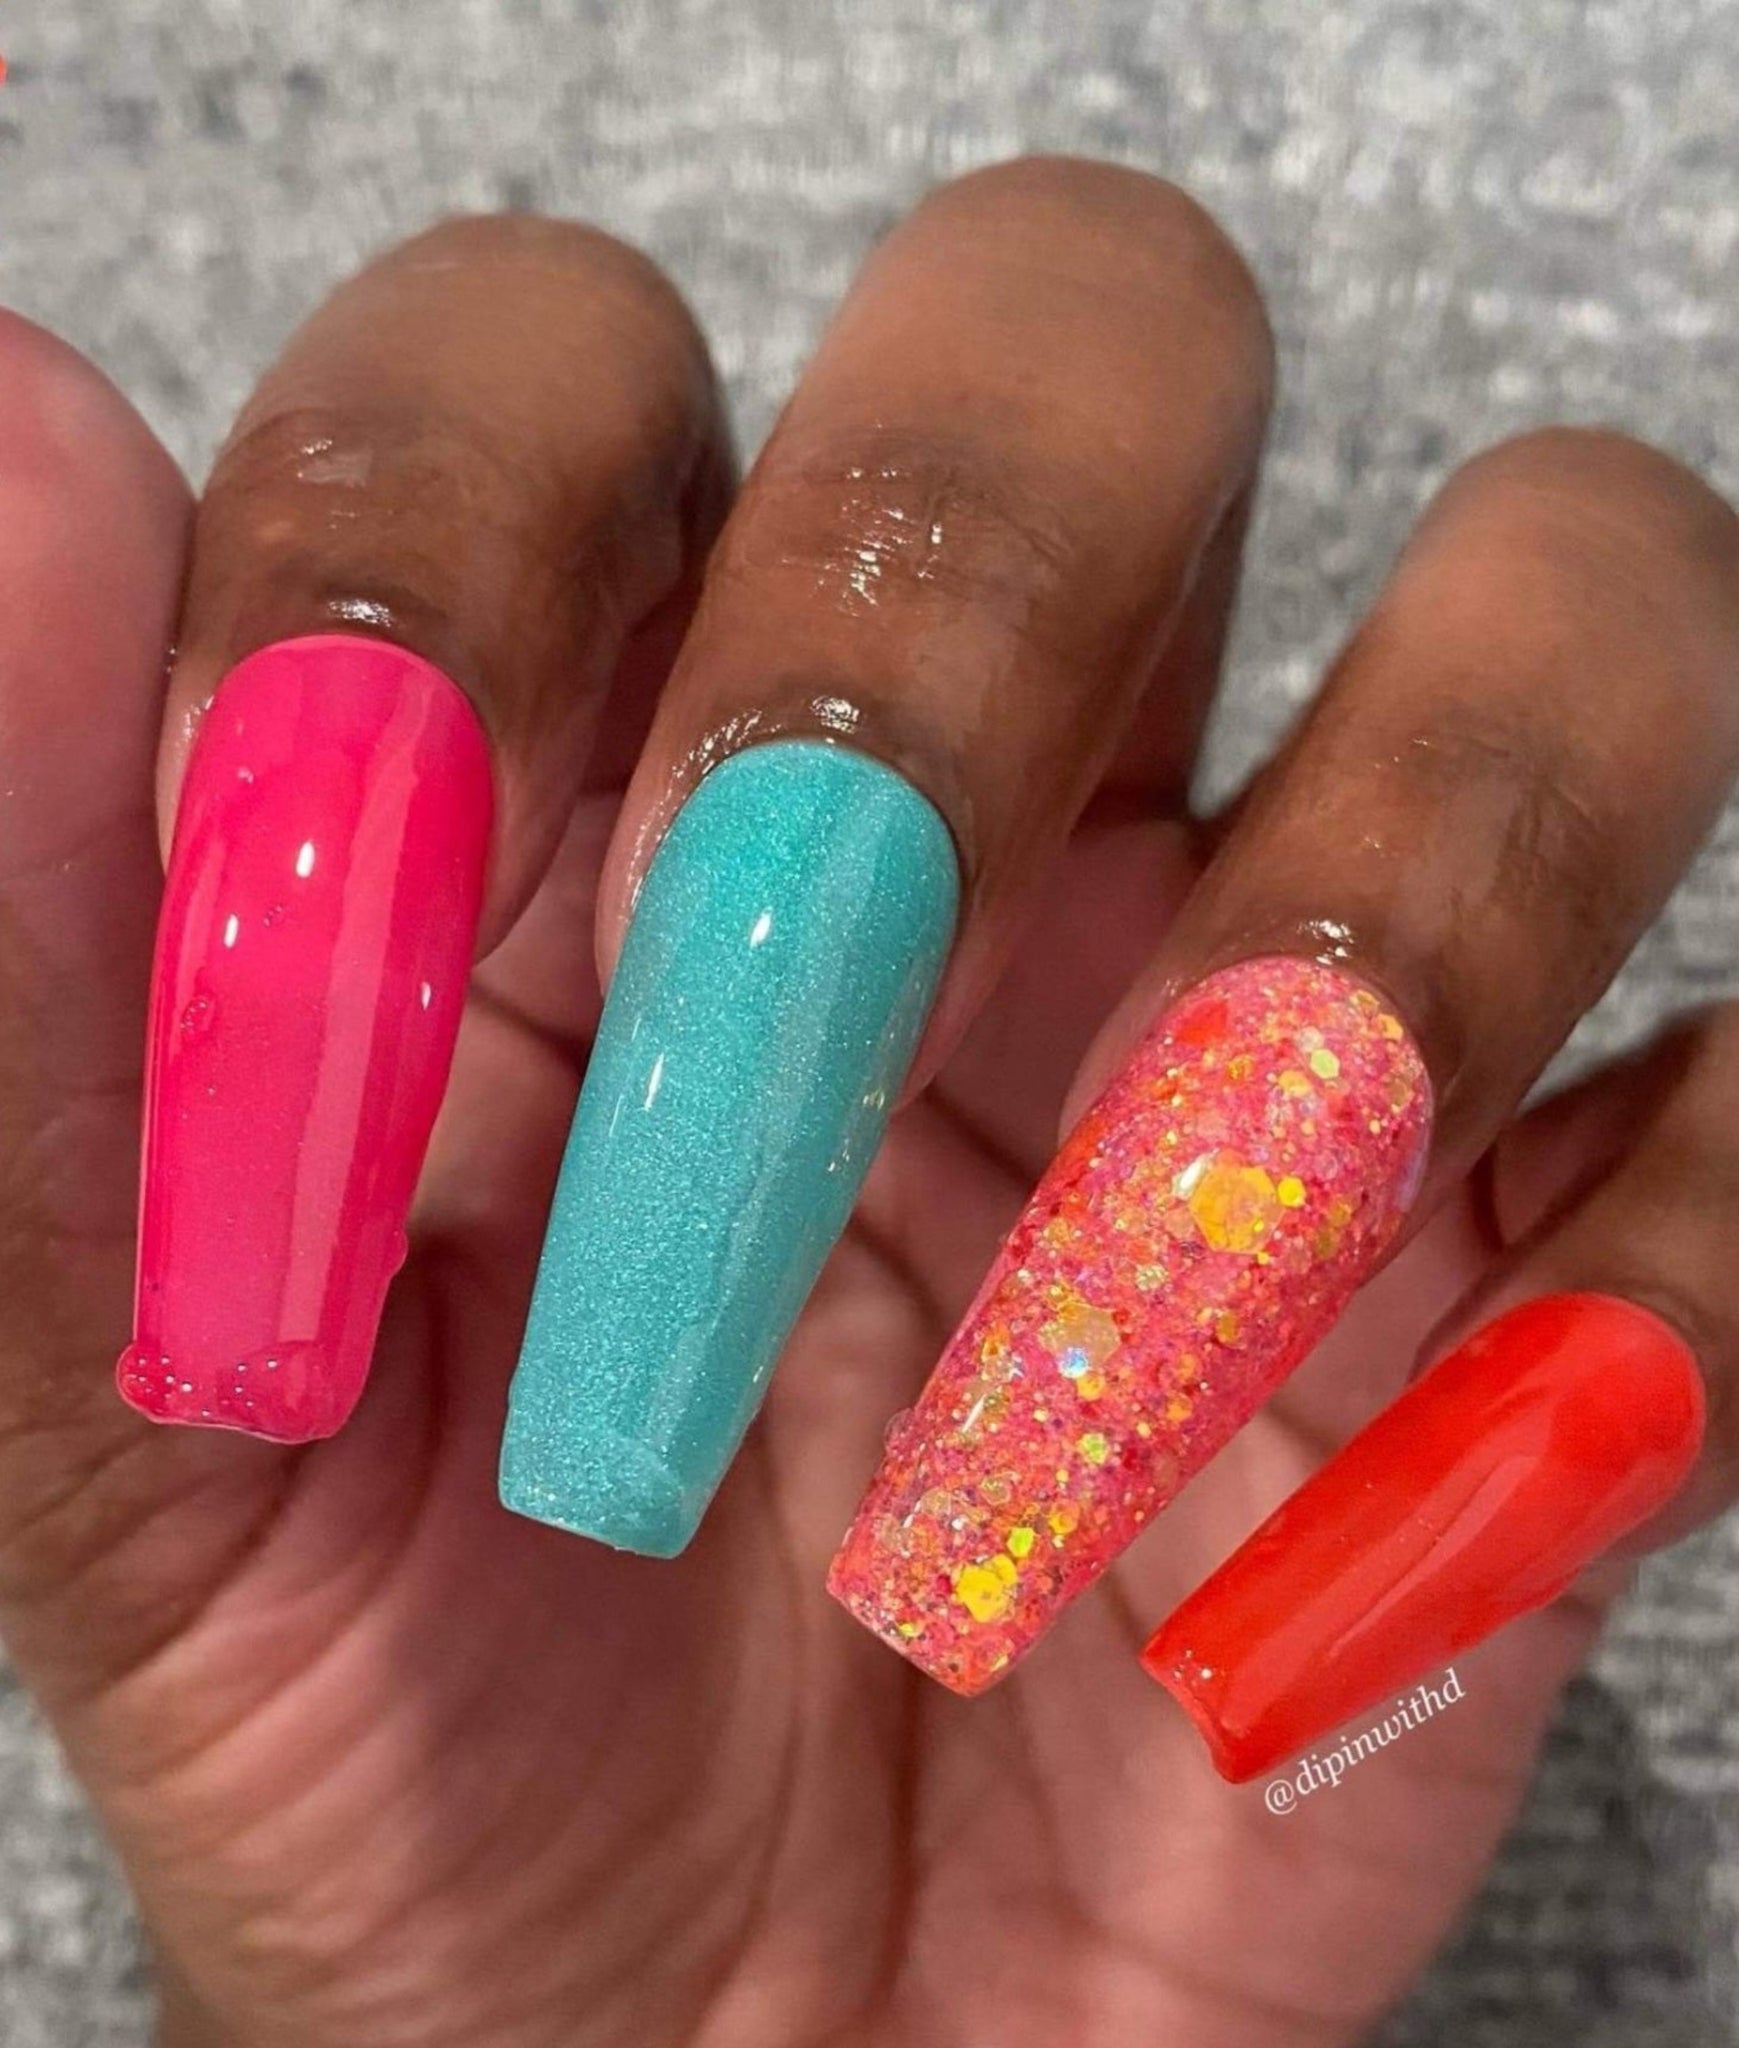 11 Popular Summer Nail Colors for 2020 - An Unblurred Lady